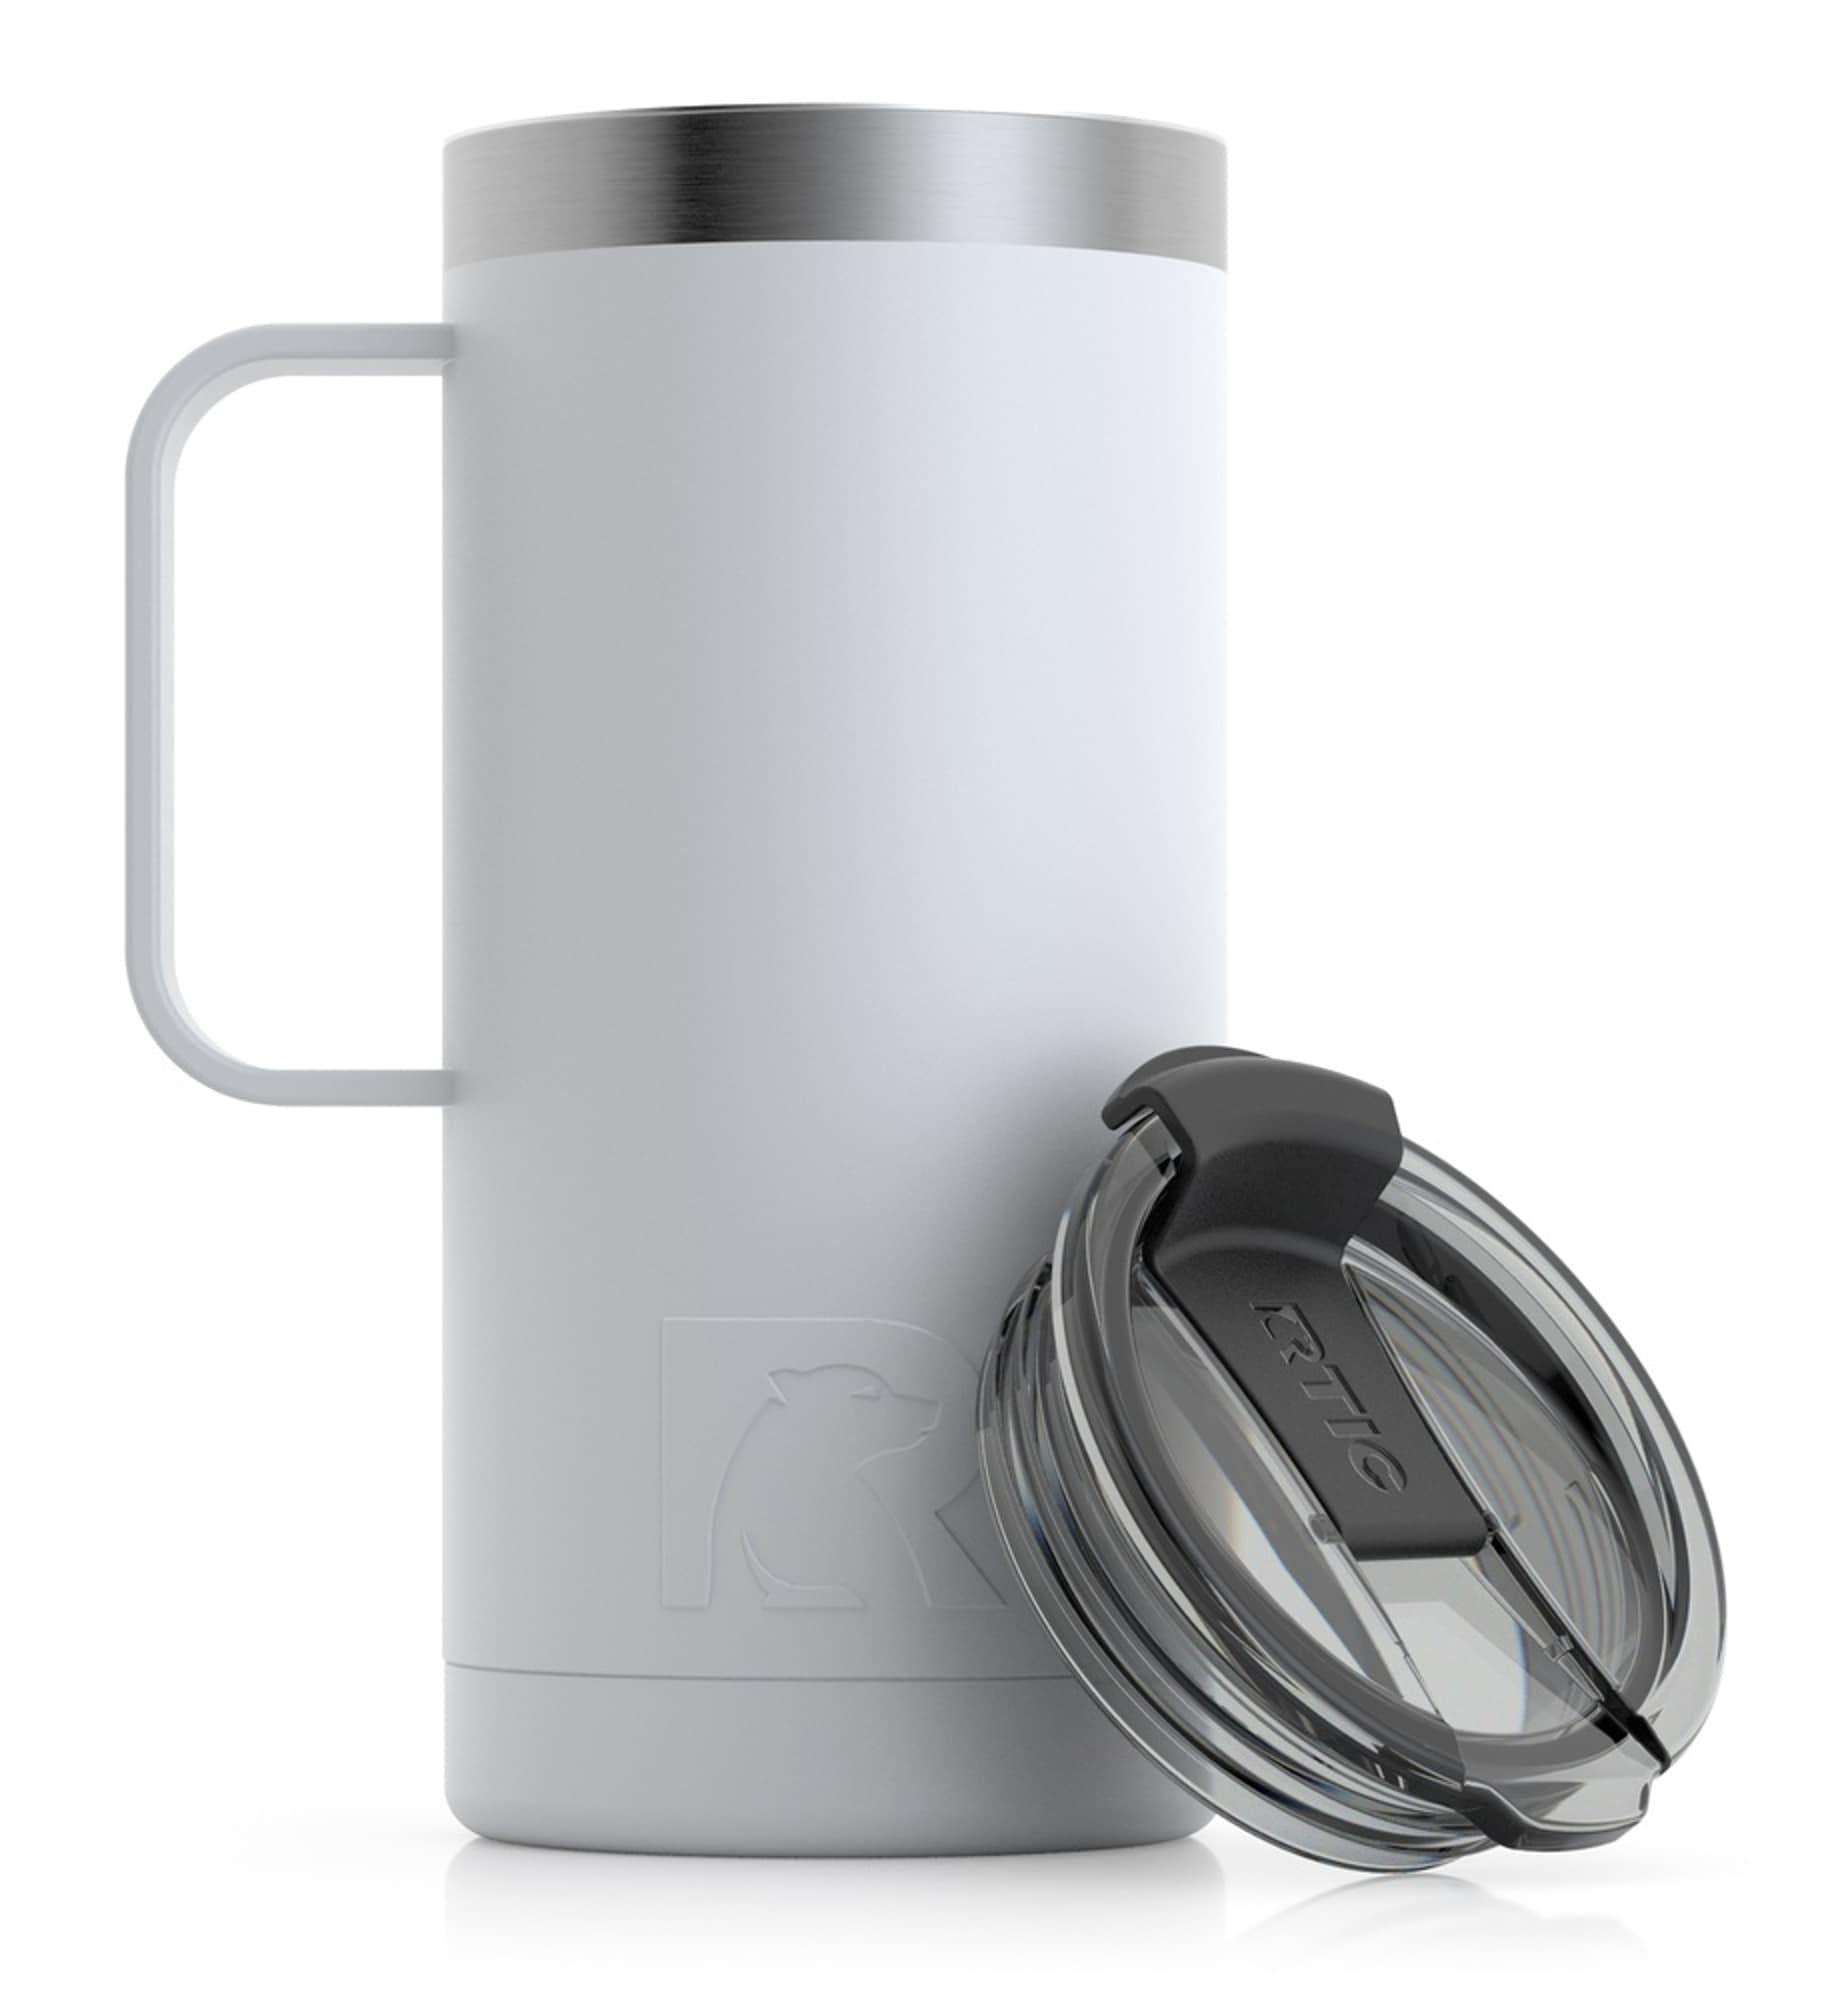 16 OZ STAINLESS STEEL TUMBLER WITH HANDLE - WHITE